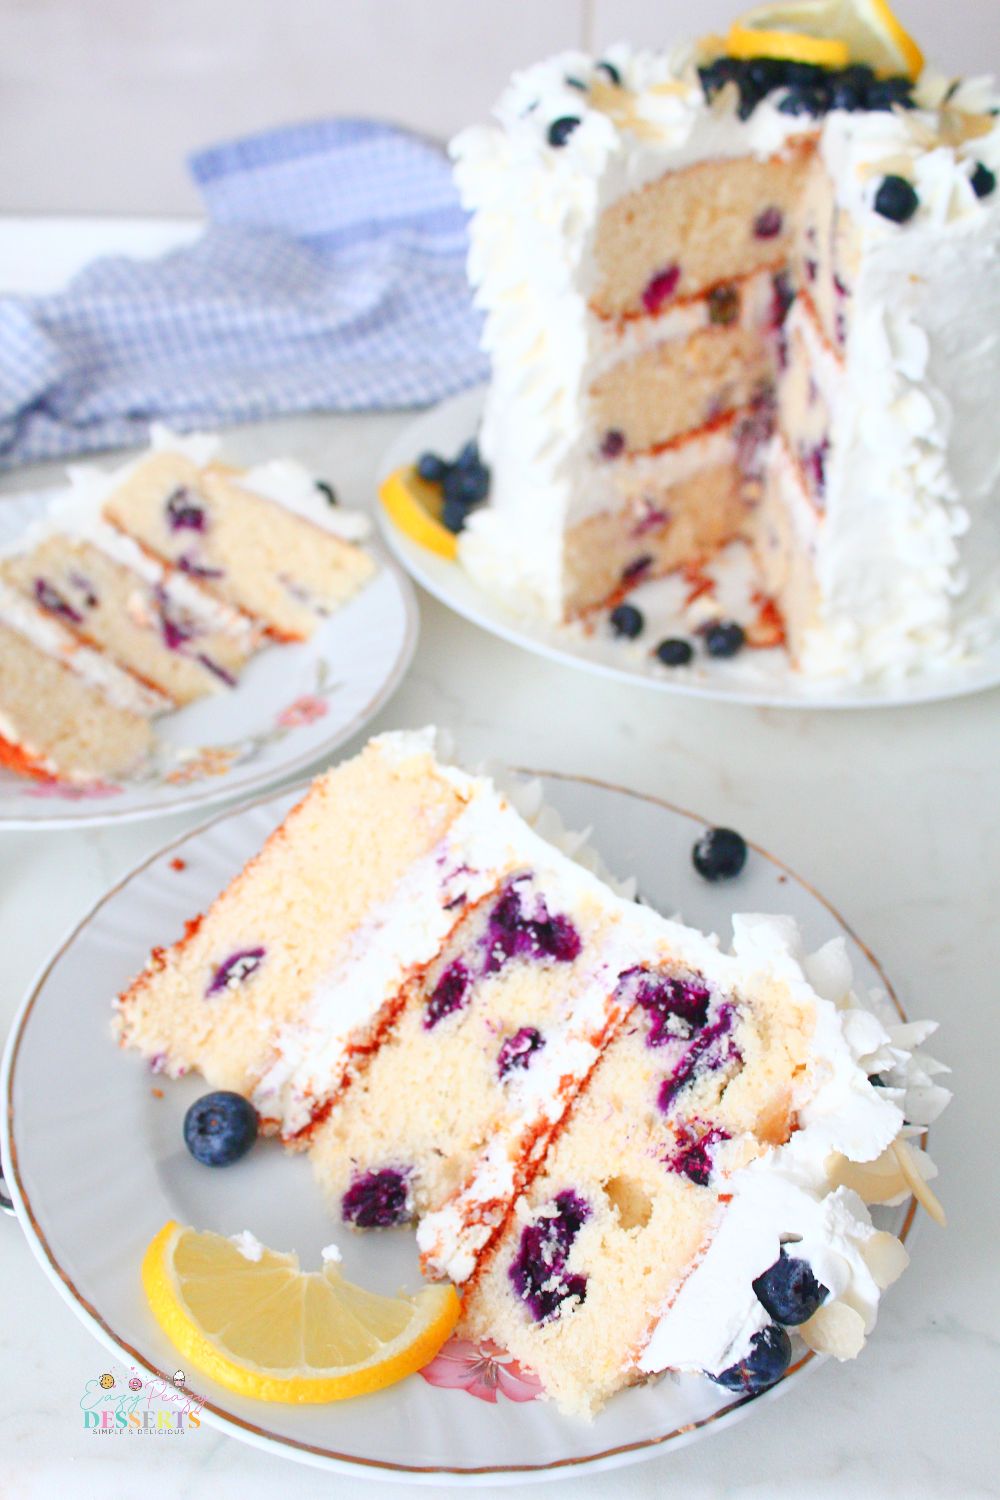 A slice of lemon and blueberry cake decorated with lemon and fresh blueberries